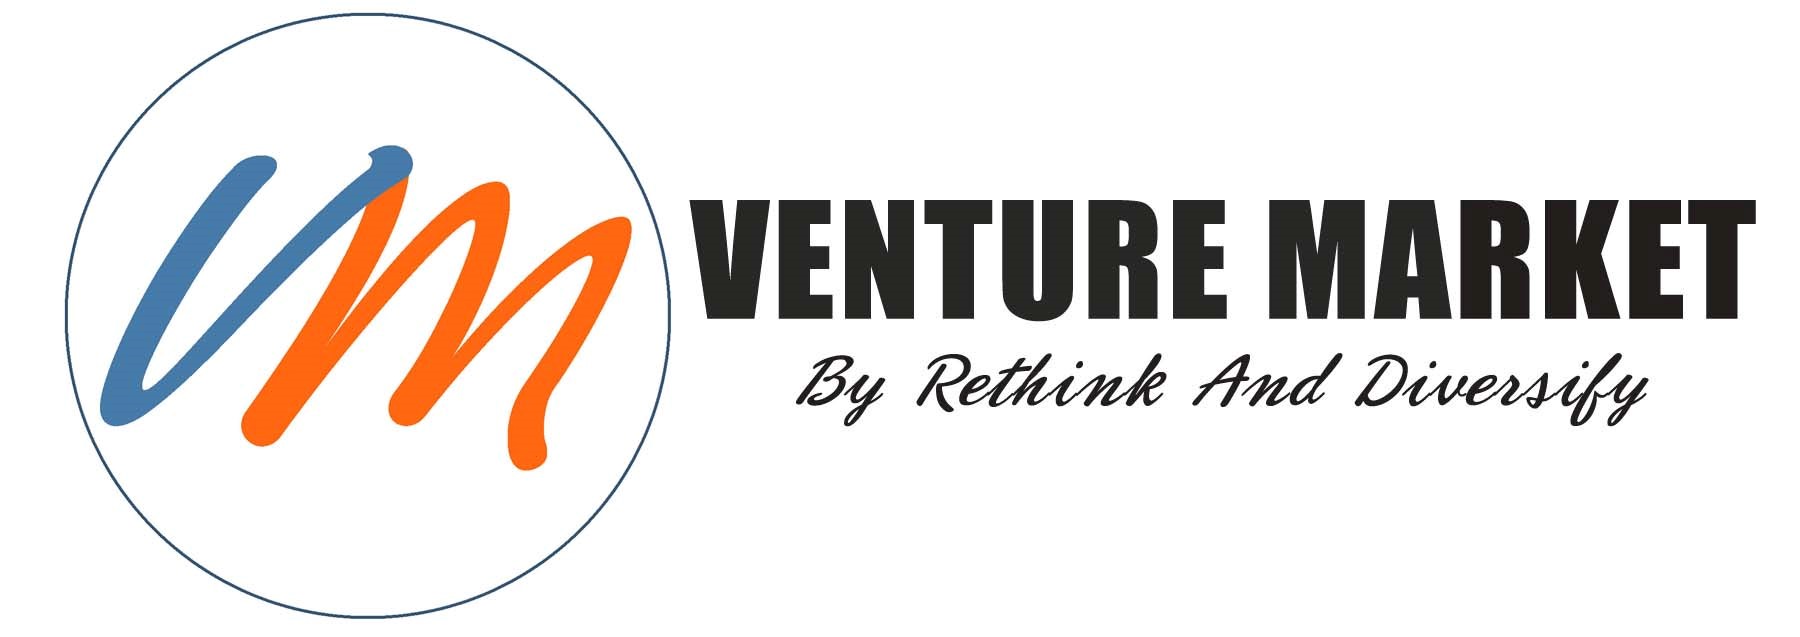 Need to raise capital for your business? – www.venturemarket.ca